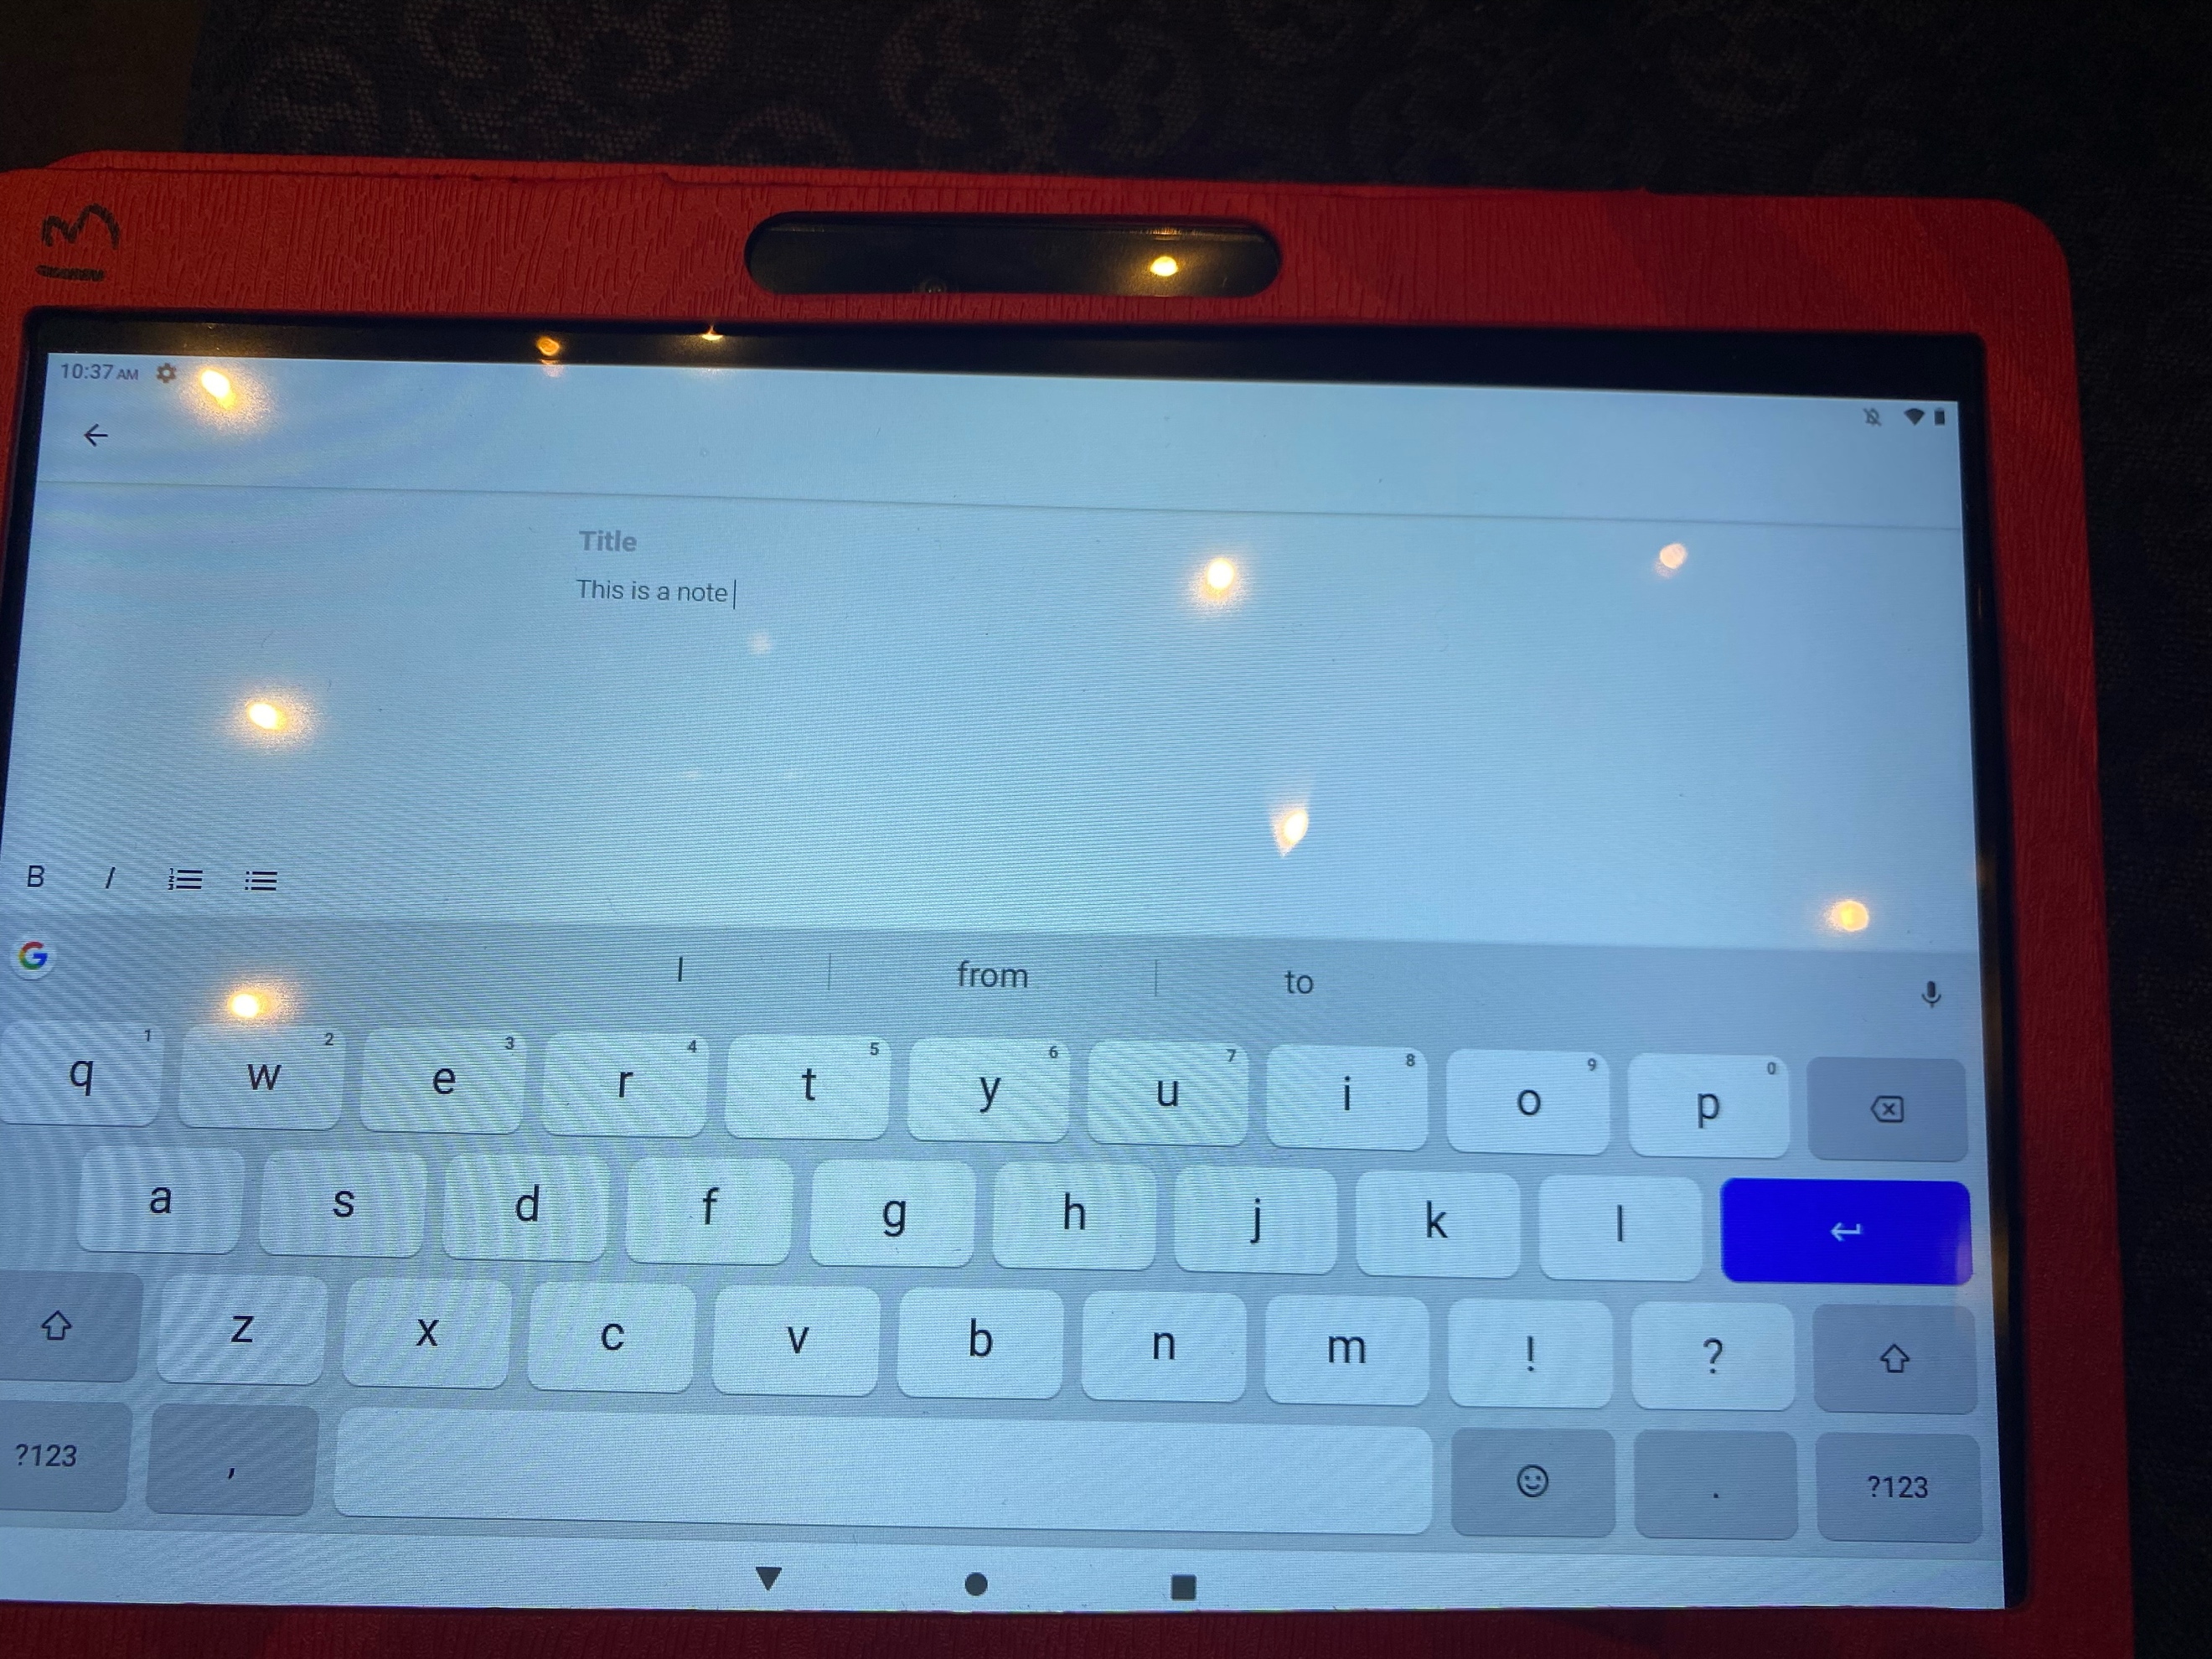 Parishioners can still type notes in the PDF on the tablet.
